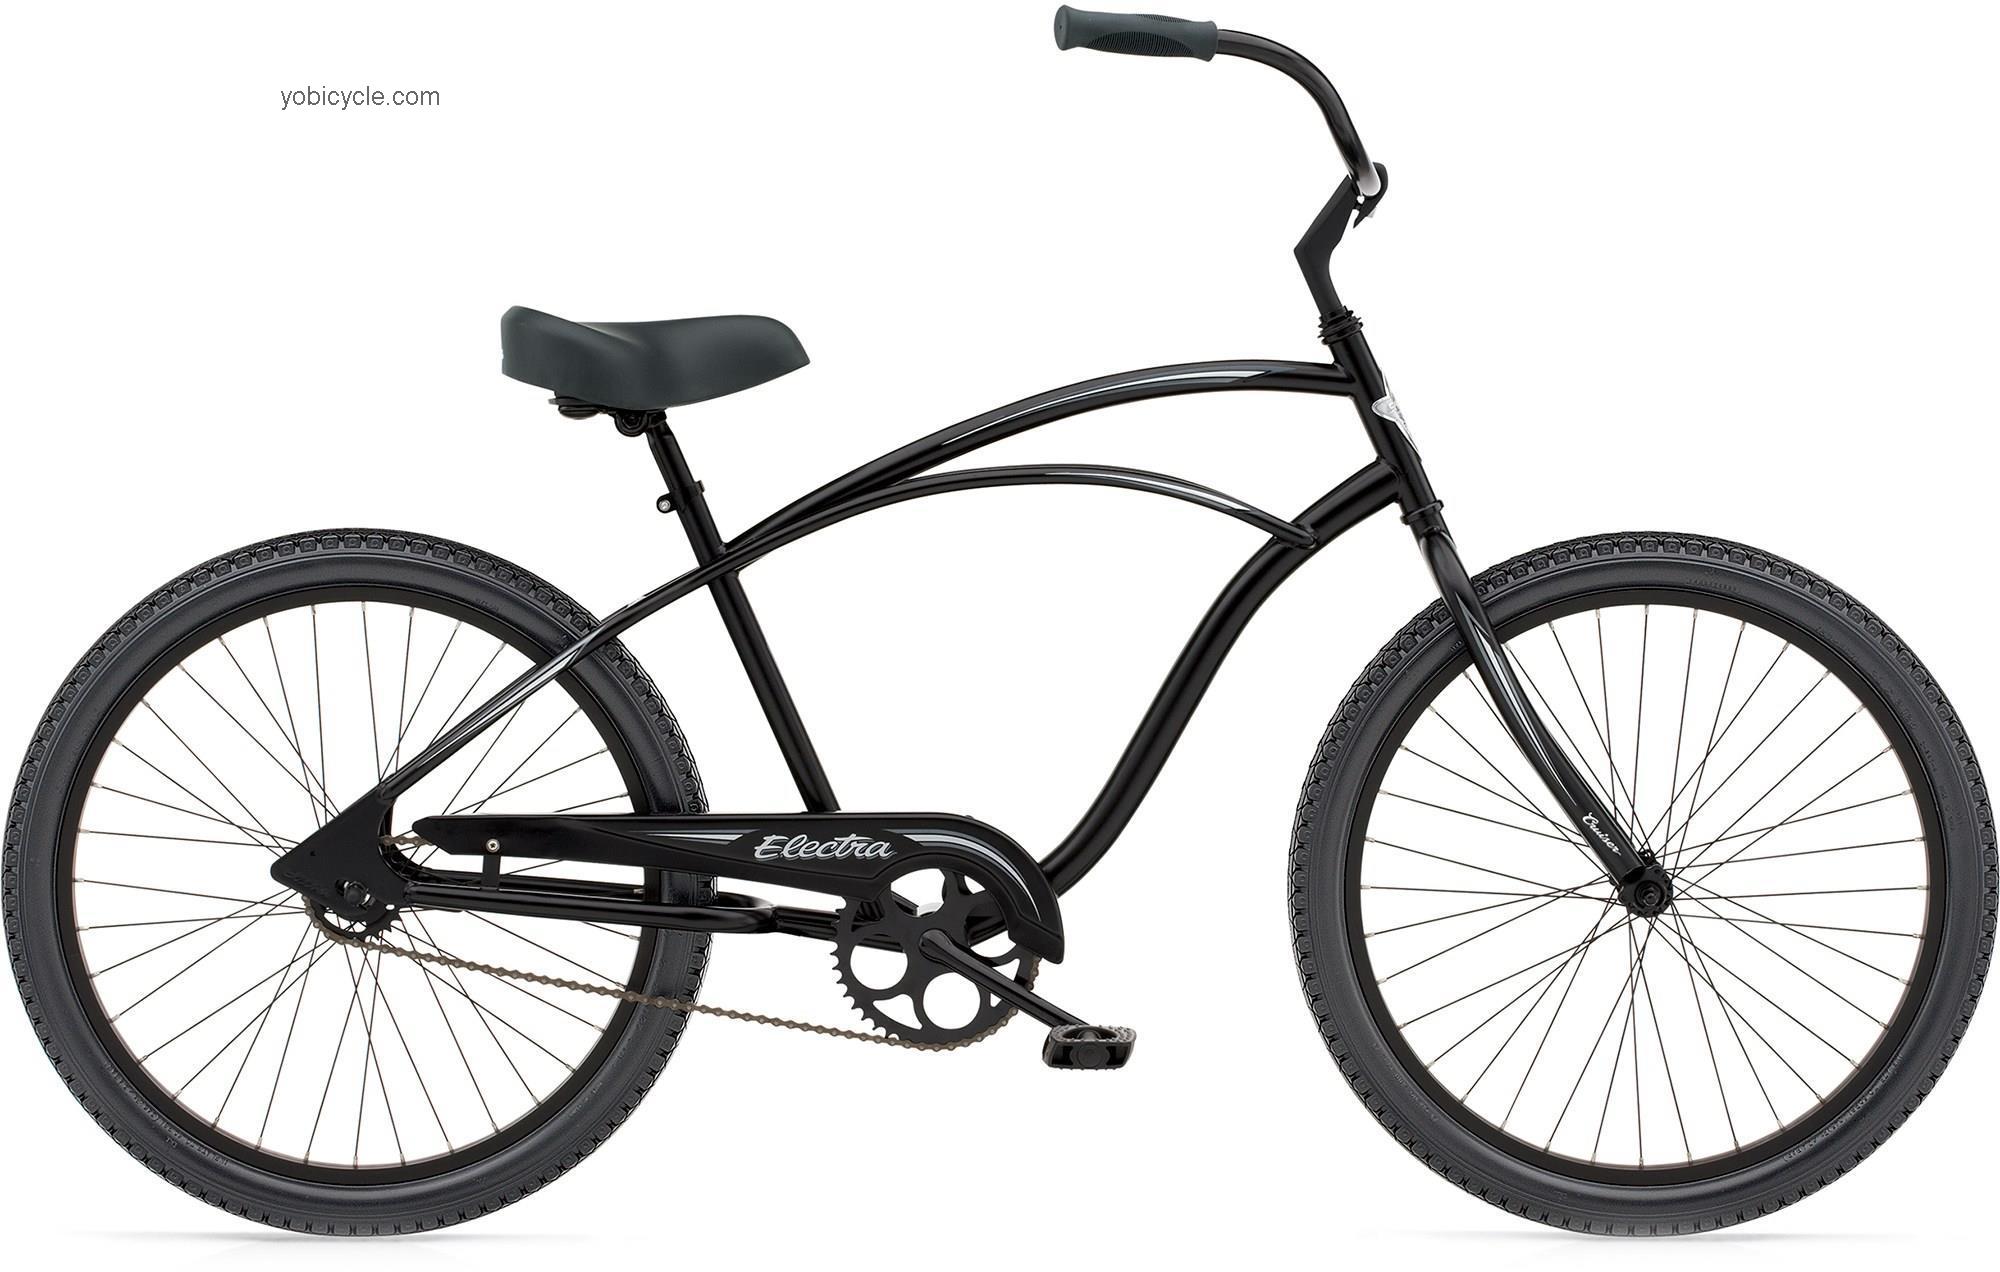 Electra Cruiser 1 2011 comparison online with competitors